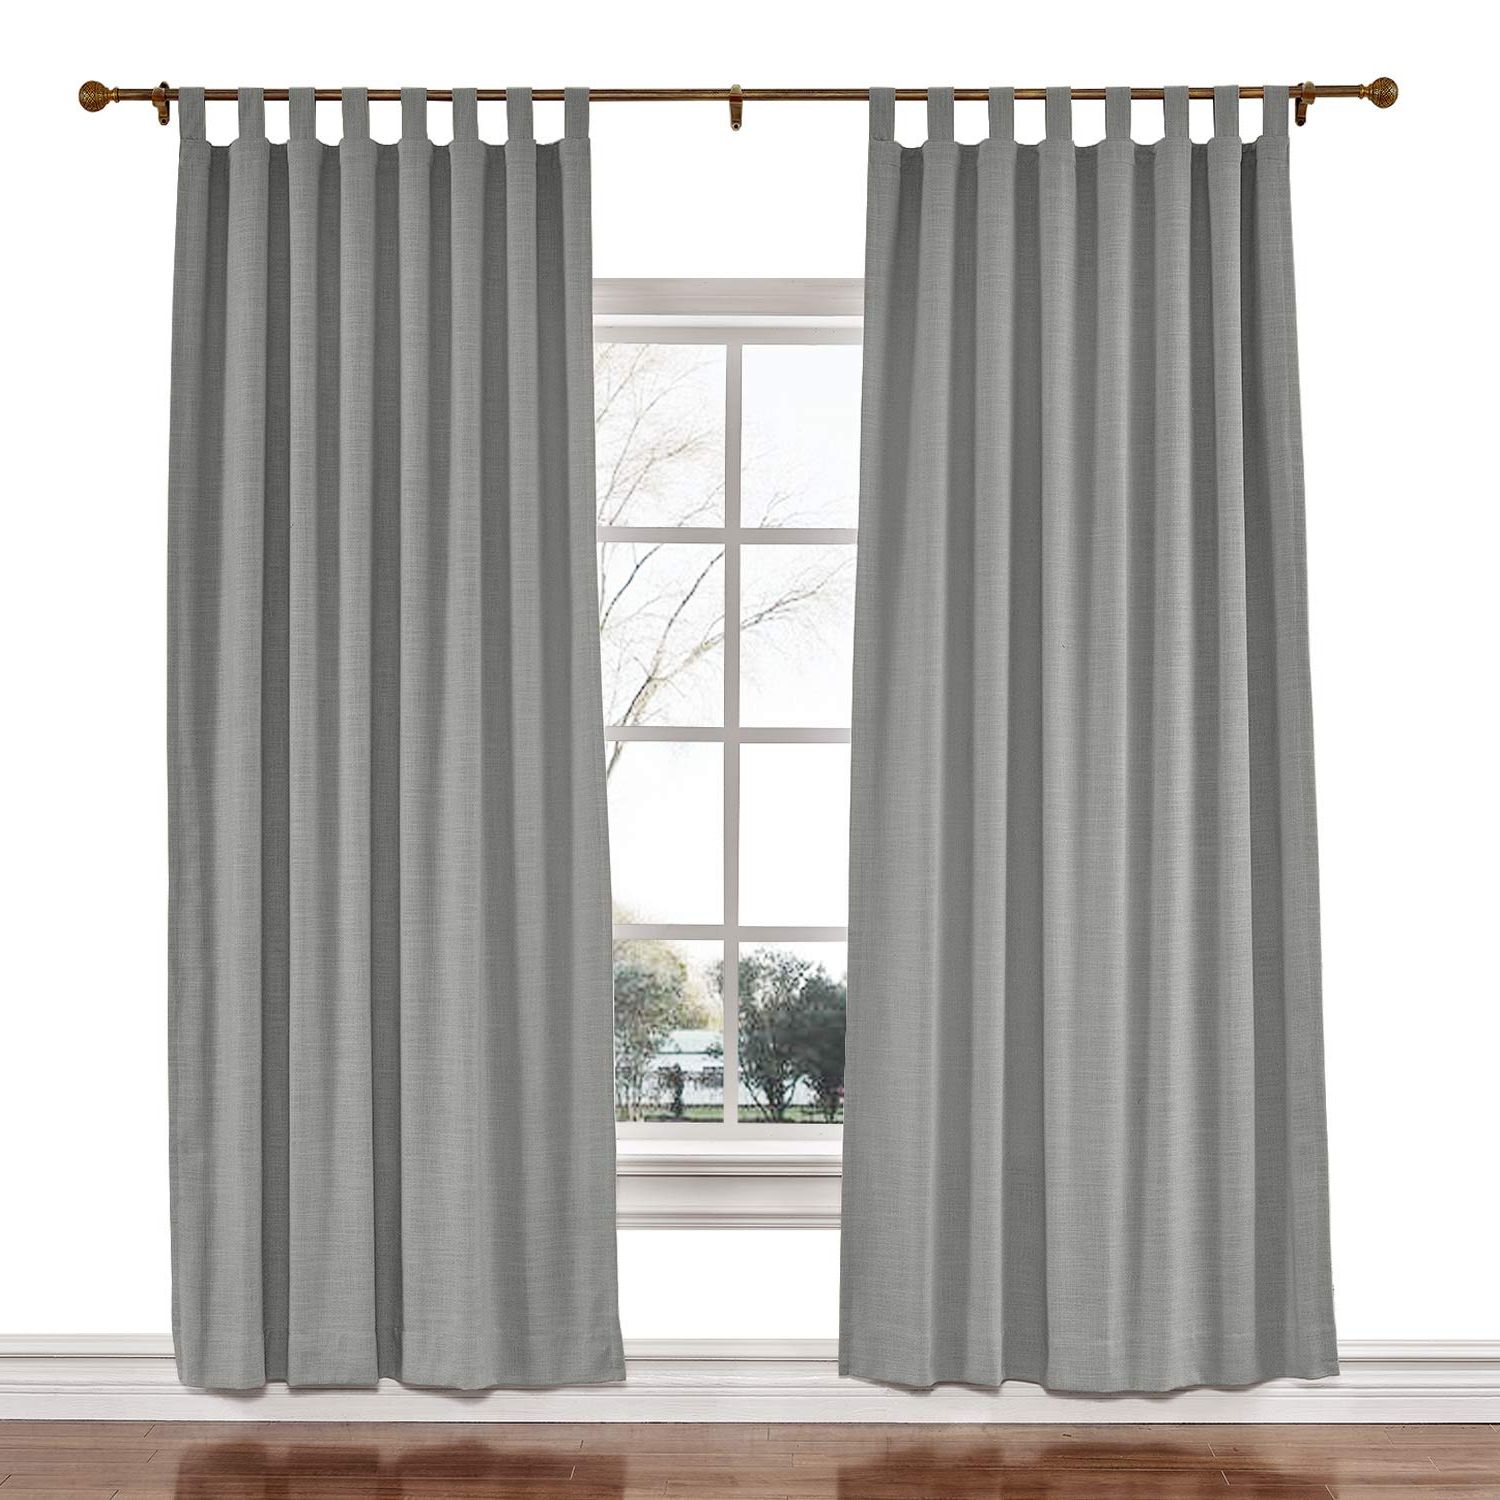 Luxury Collection Faux Leather Blackout Single Curtain Panels Throughout Well Known Amazon: Twopages 100 W X 96 L Inch Tab Top Darkening (View 1 of 20)